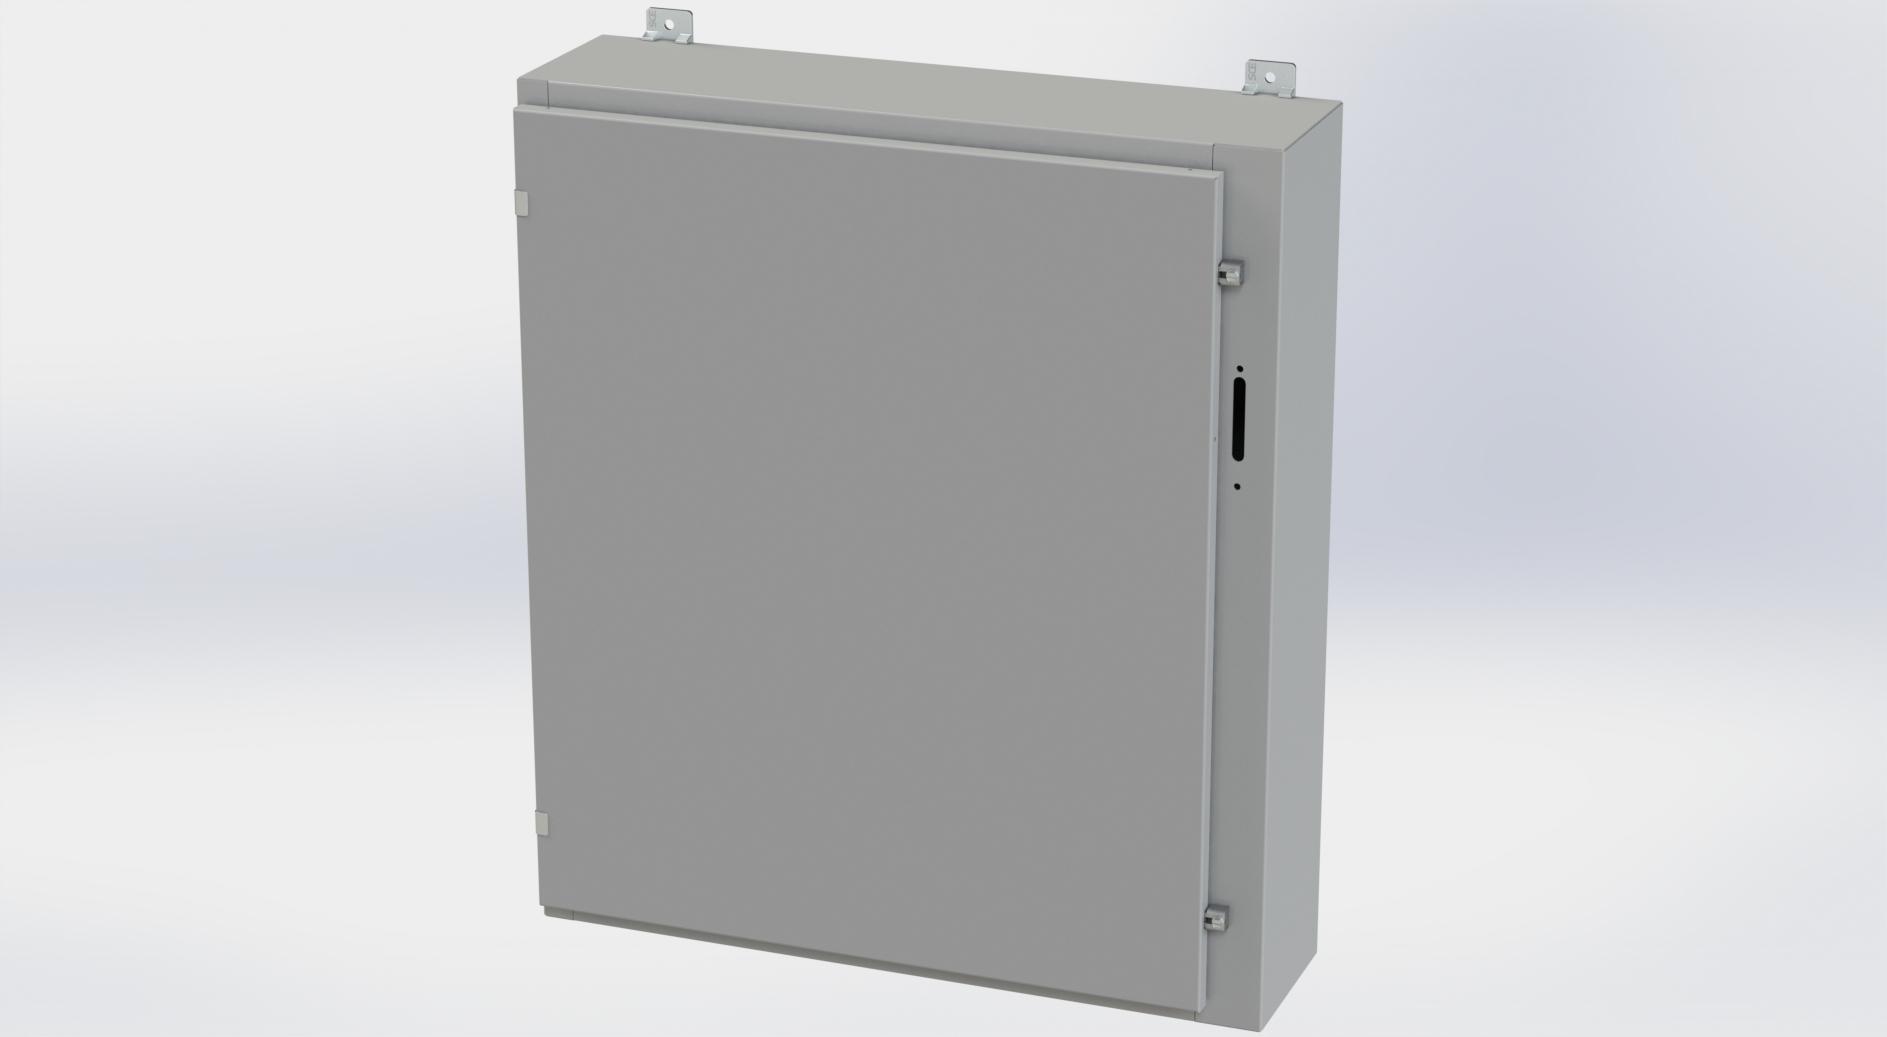 Saginaw Control SCE-36HS3108LP HS LP Enclosure, Height:36.00", Width:31.38", Depth:8.00", ANSI-61 gray powder coating inside and out. Optional sub-panels are powder coated white.